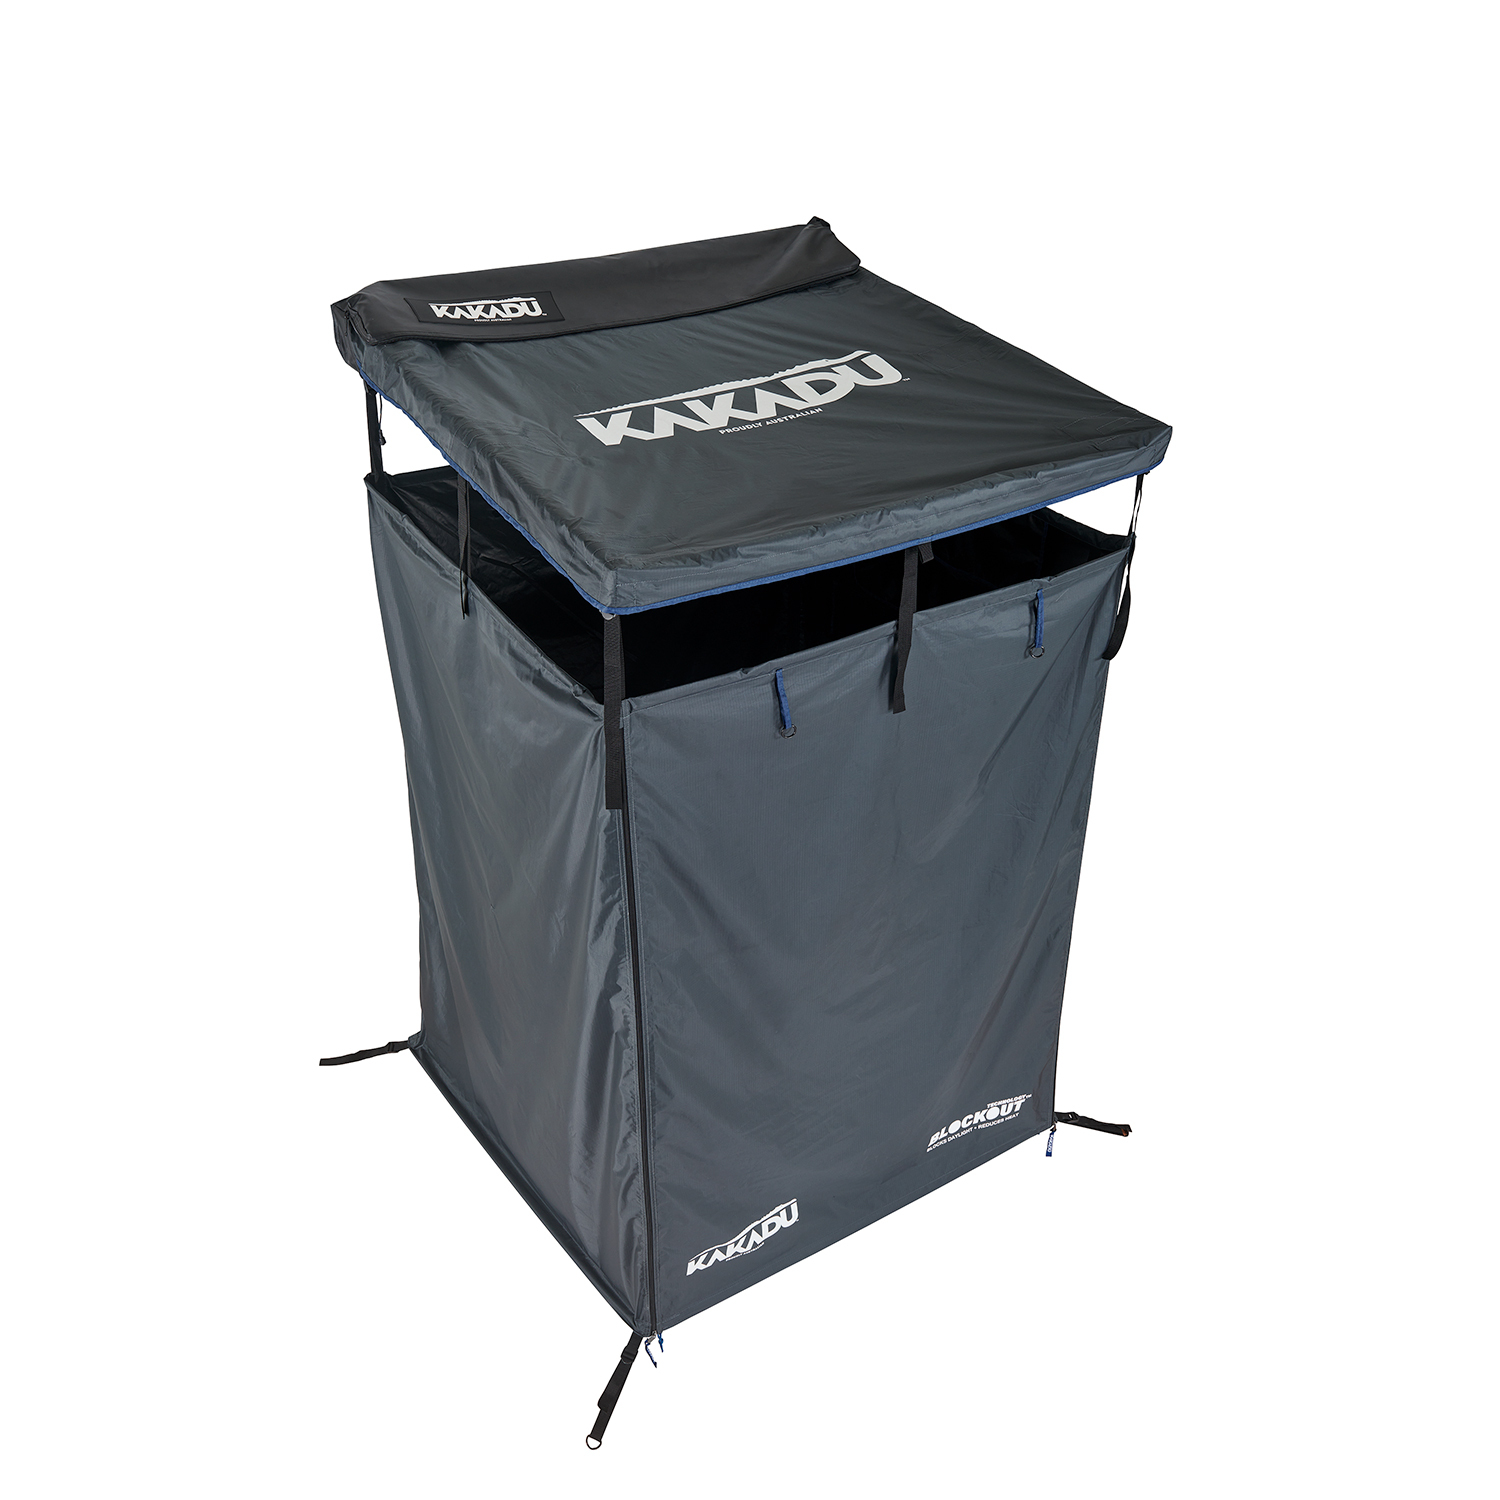 Outback Shower Vehicle Tent